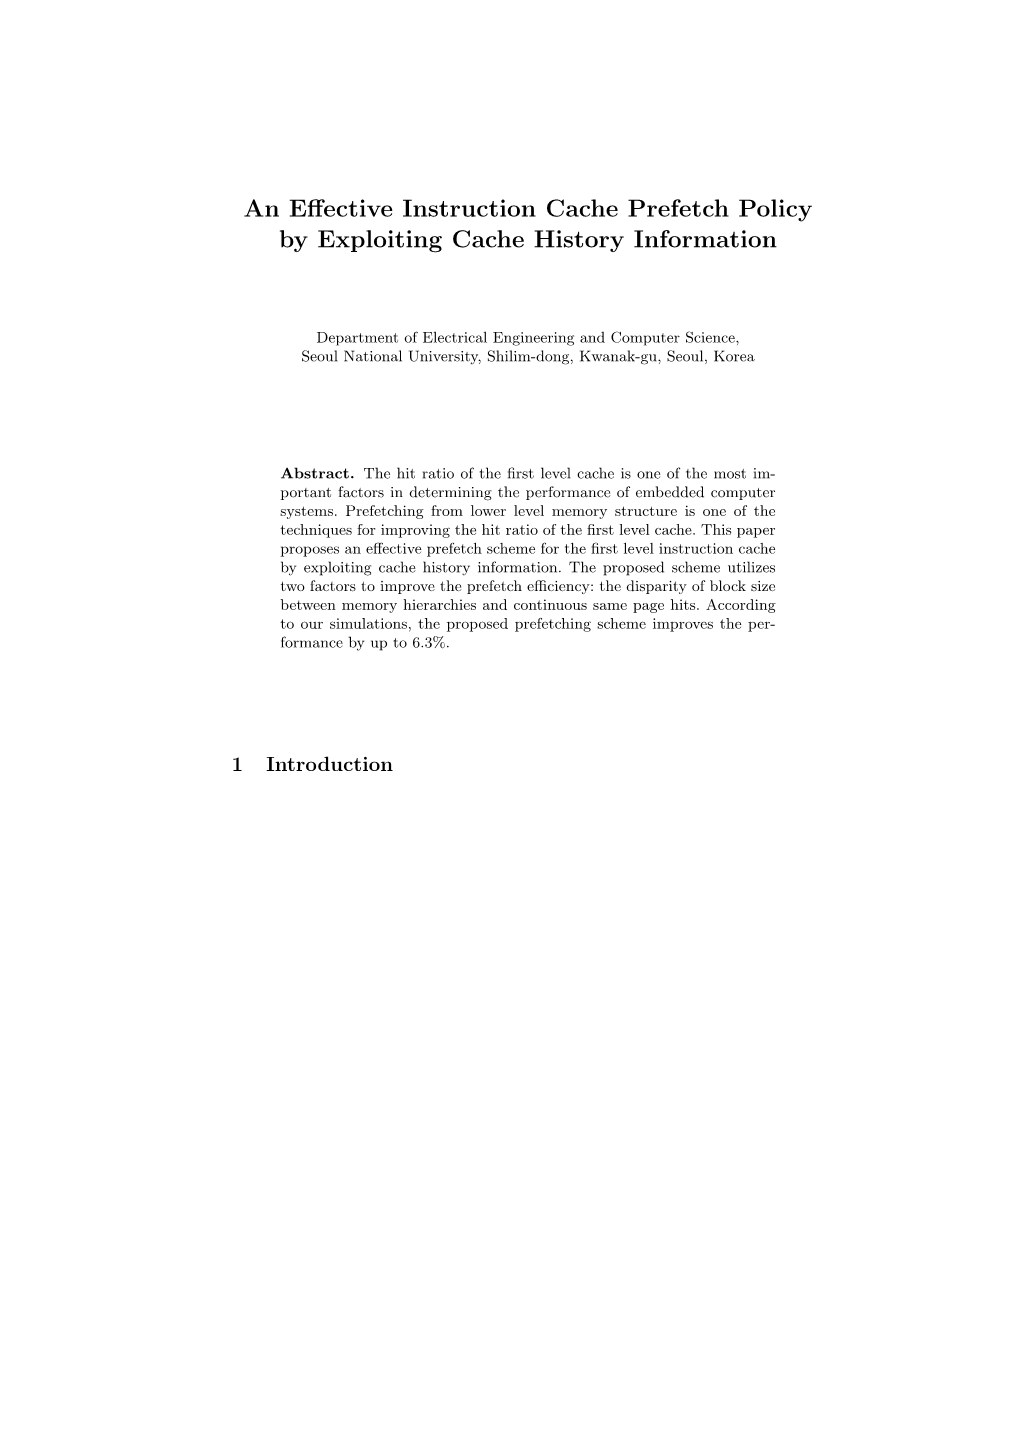 An Effective Instruction Cache Prefetch Policy by Exploiting Cache